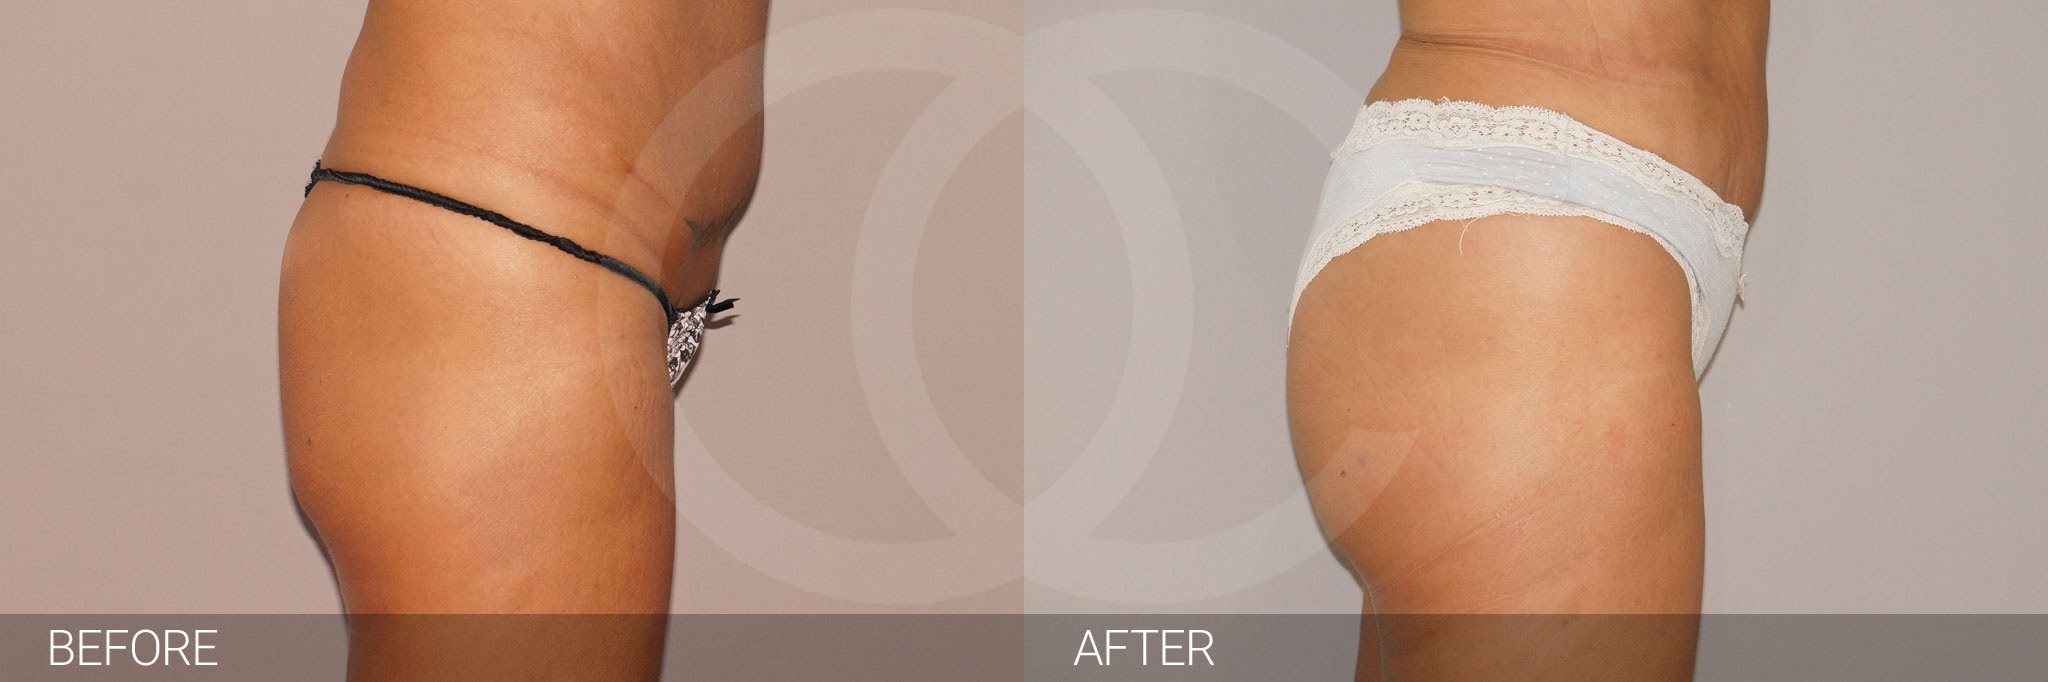 Fat transfer - what you can do about flat bottom. Ocean Clinic Marbella Madrid